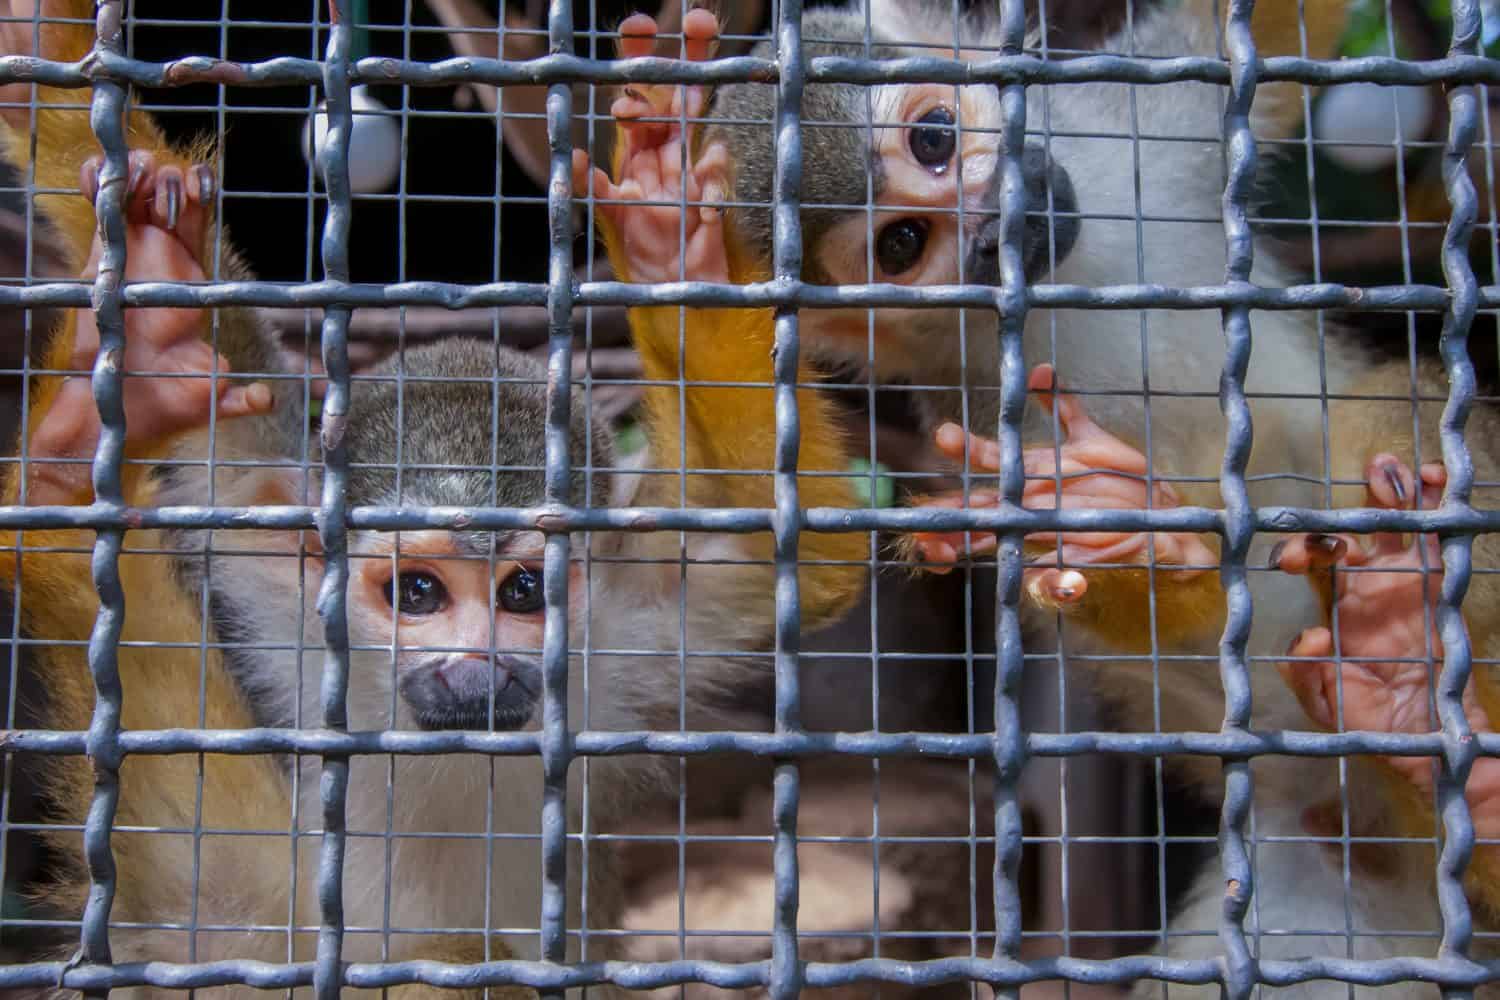 The squirrel monkey is locked in a cage.